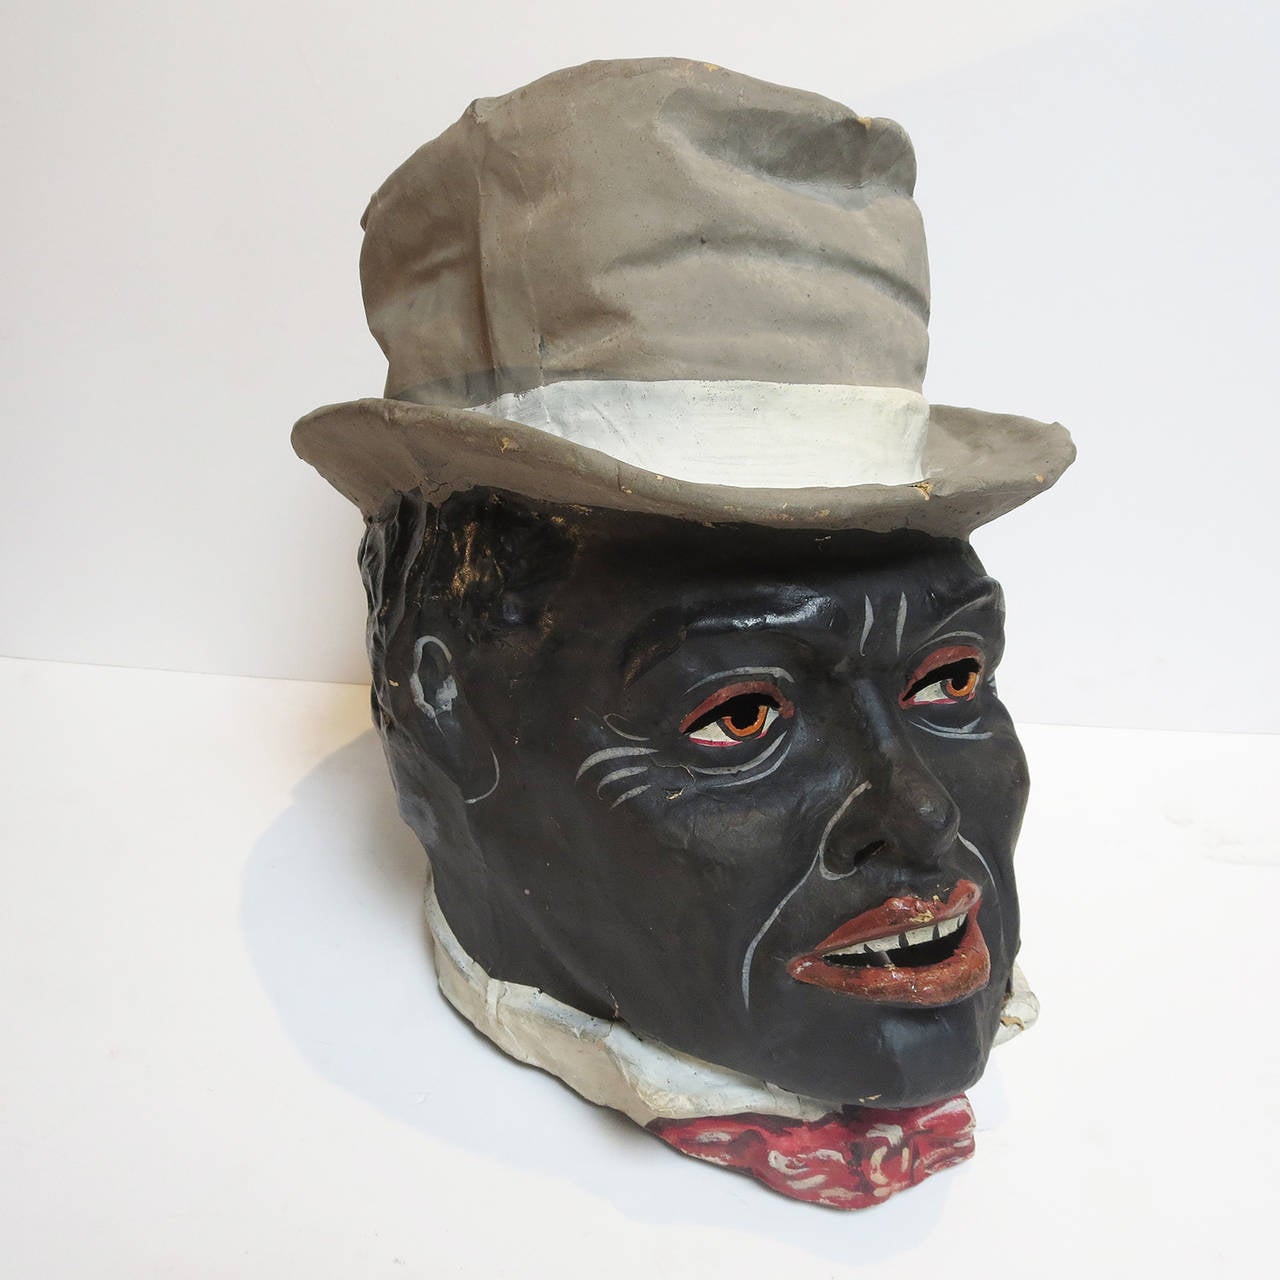 Mr. Bojangles himself! This wonderfully charming costume includes a head, two hands, and two bare feet. All items are made in painted papier mâché, and are in nice original condition. The head and hands slip over yours, while the feet would clip